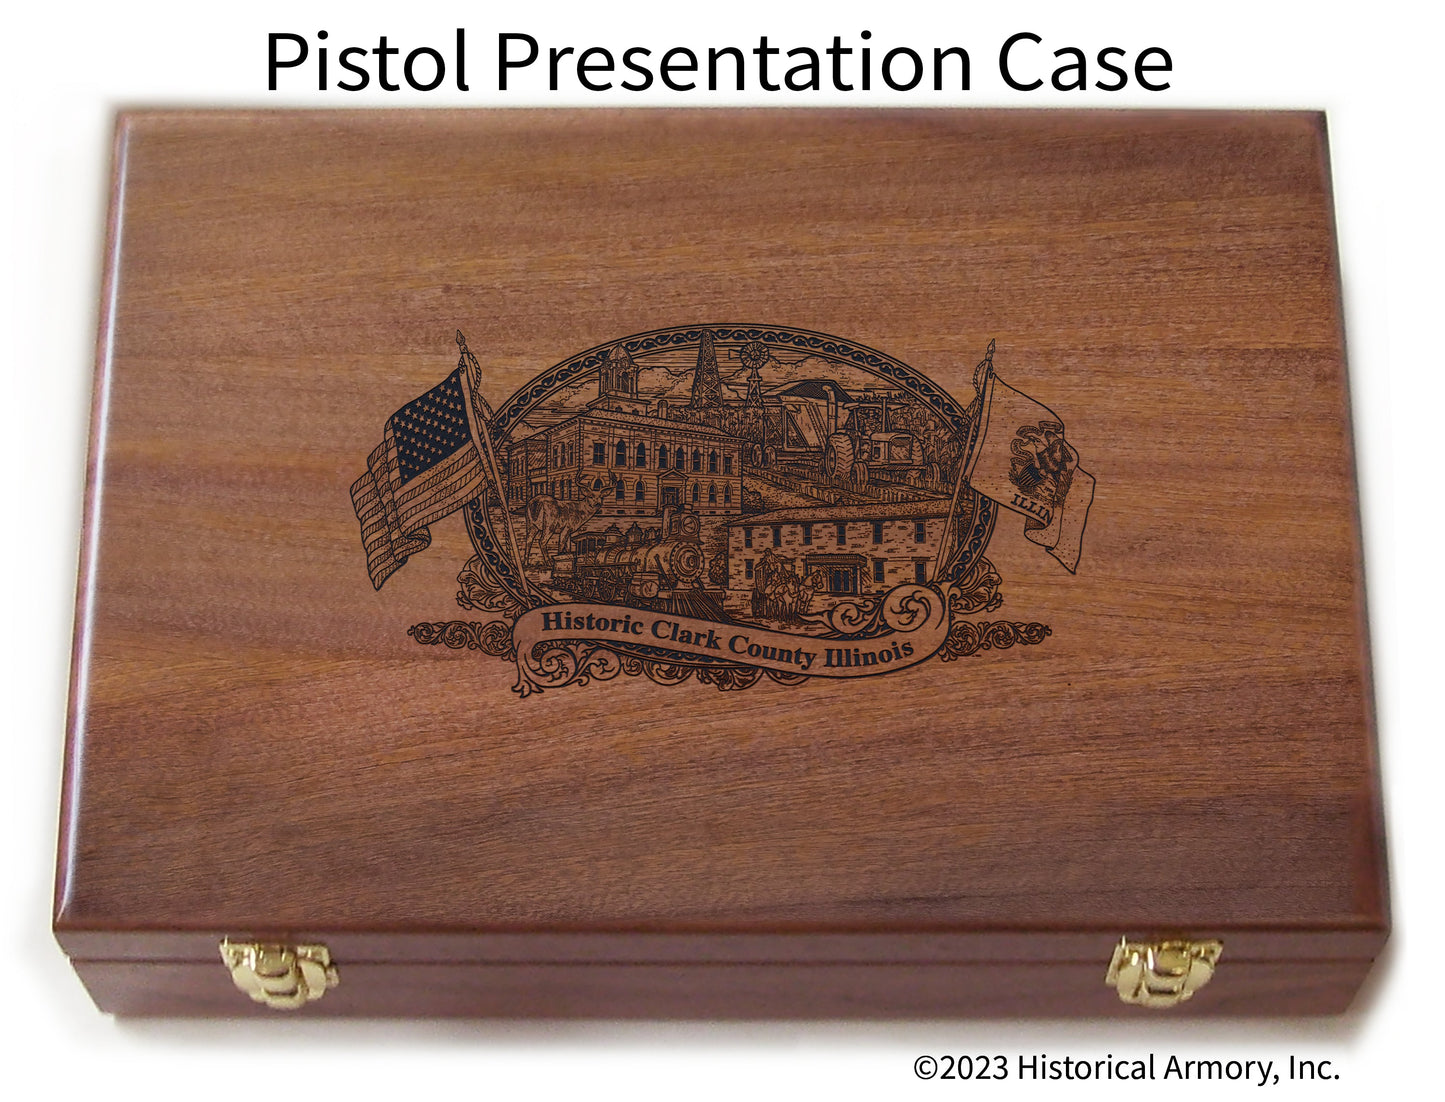 Clark County Illinois Engraved .45 Auto Ruger 1911 Presentation Case